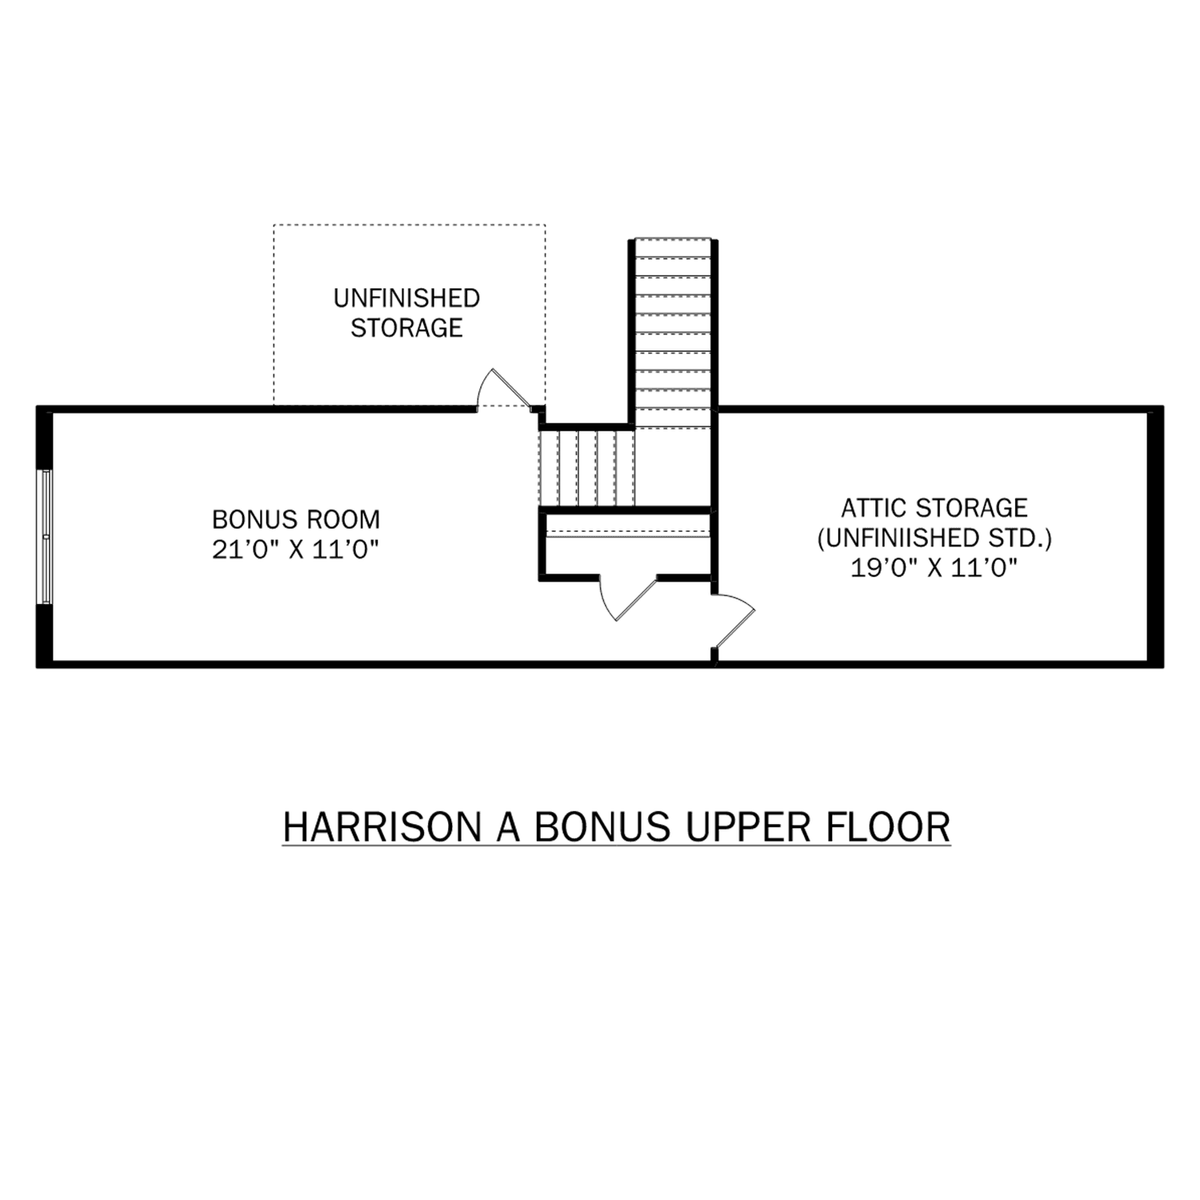 2 - The Harrison with Bonus buildable floor plan layout in Davidson Homes' Cain Park community.